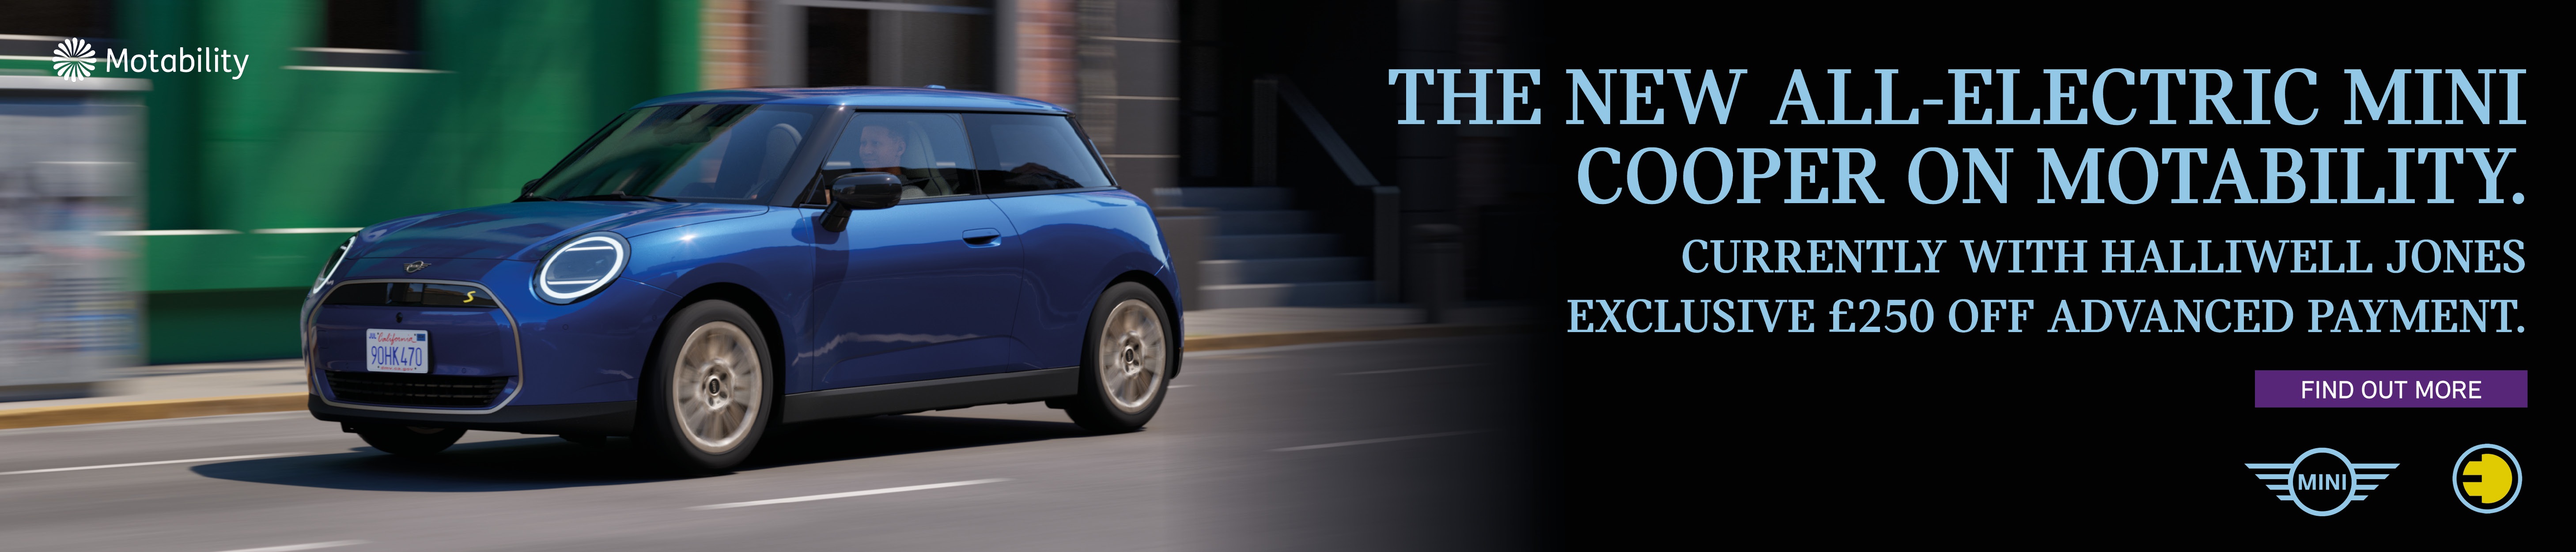 The New All-Electric MINI Cooper on Motability